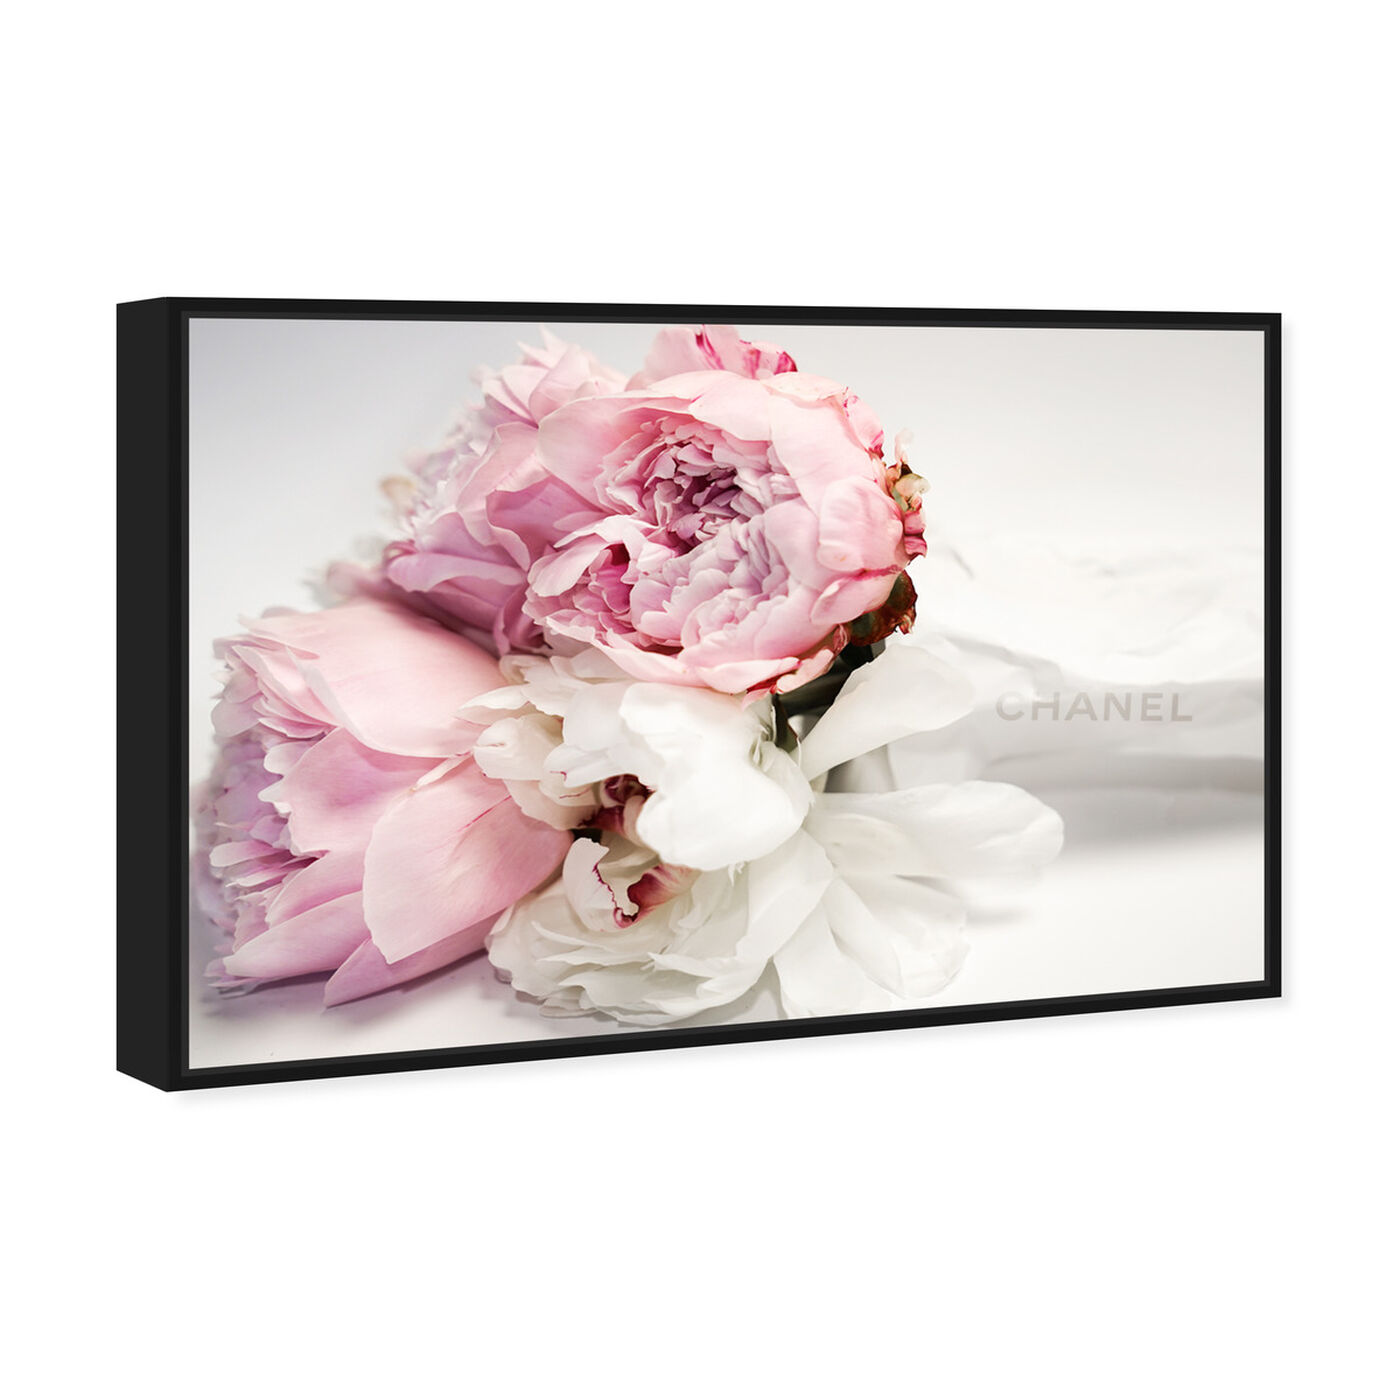 Angled view of Peonies and Magnolia Love featuring fashion and glam and lifestyle art.